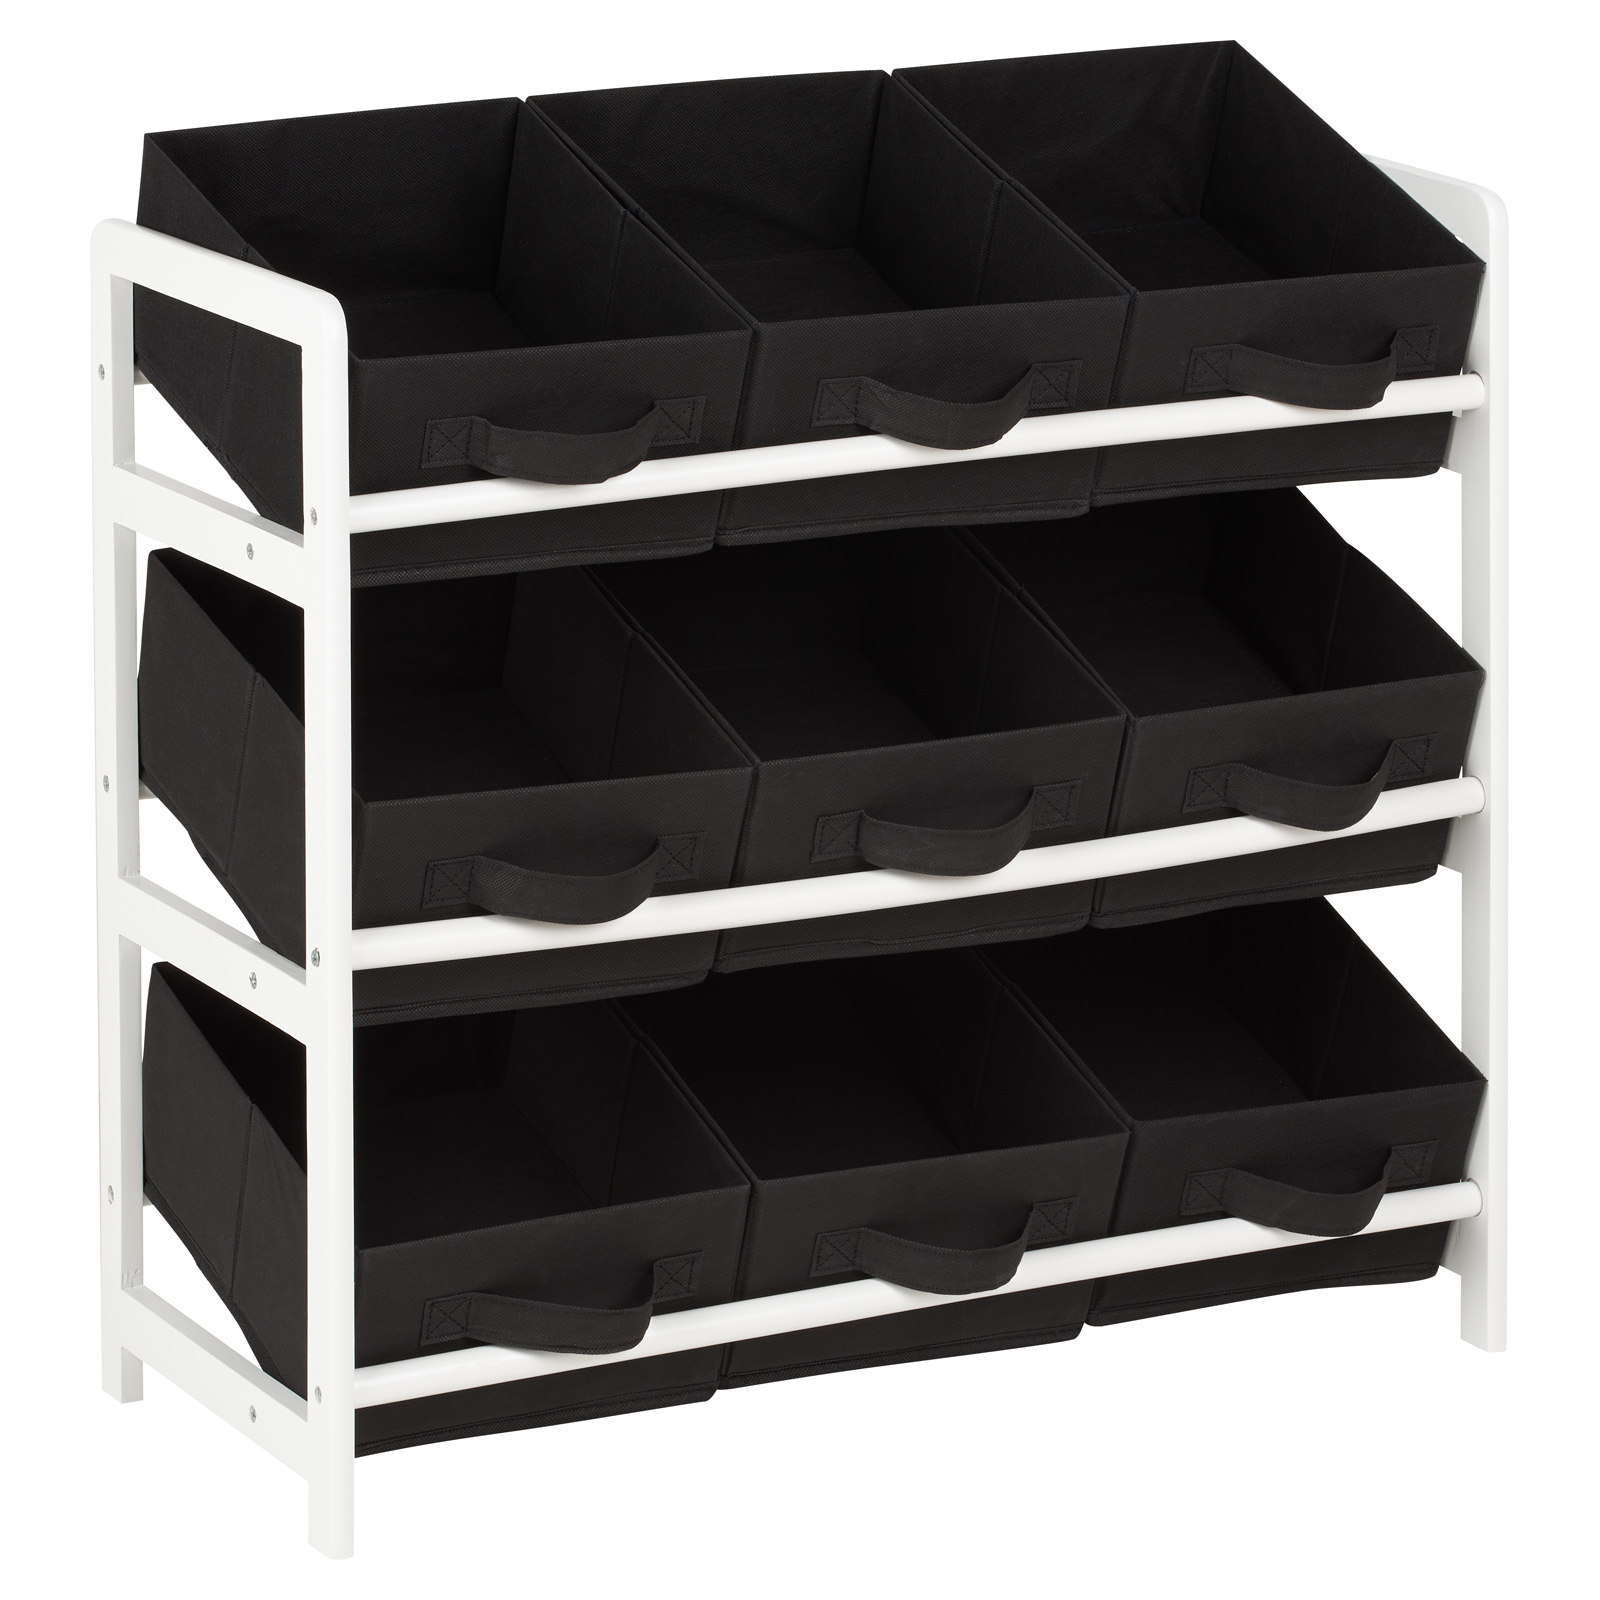 Details About Hartleys 3 Tier Storage Shelf Unit Kids Childrens Bedroom Boxesdrawers Tox Box throughout sizing 1600 X 1600